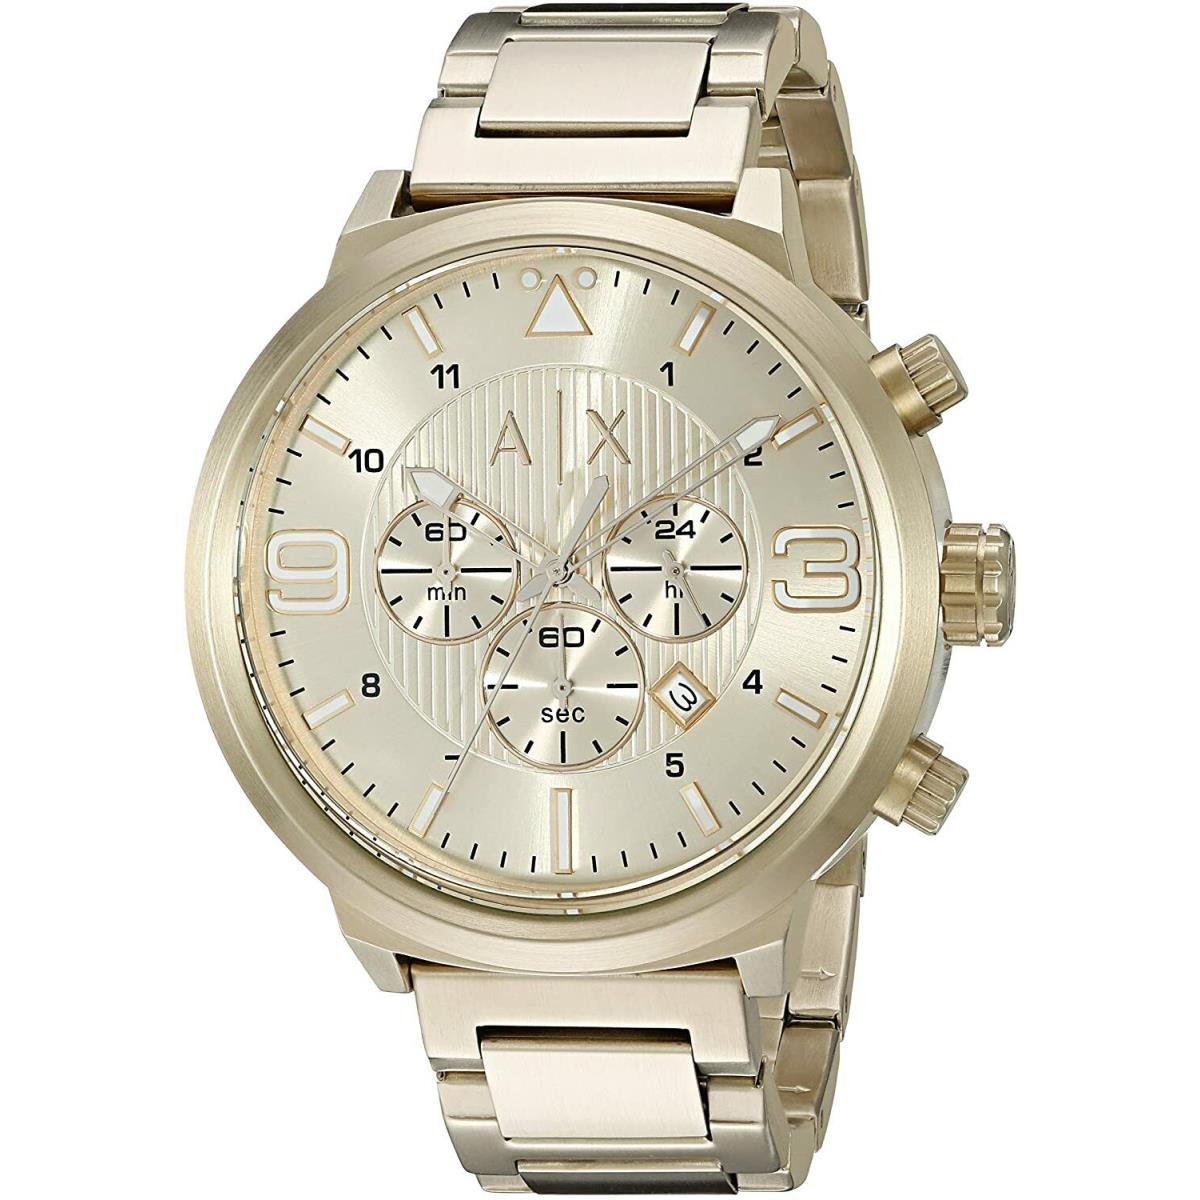 Armani Exchange Atlc Gold-tone Mens Watch AX1368 - Gold Dial, Gold Band, Gold Bezel